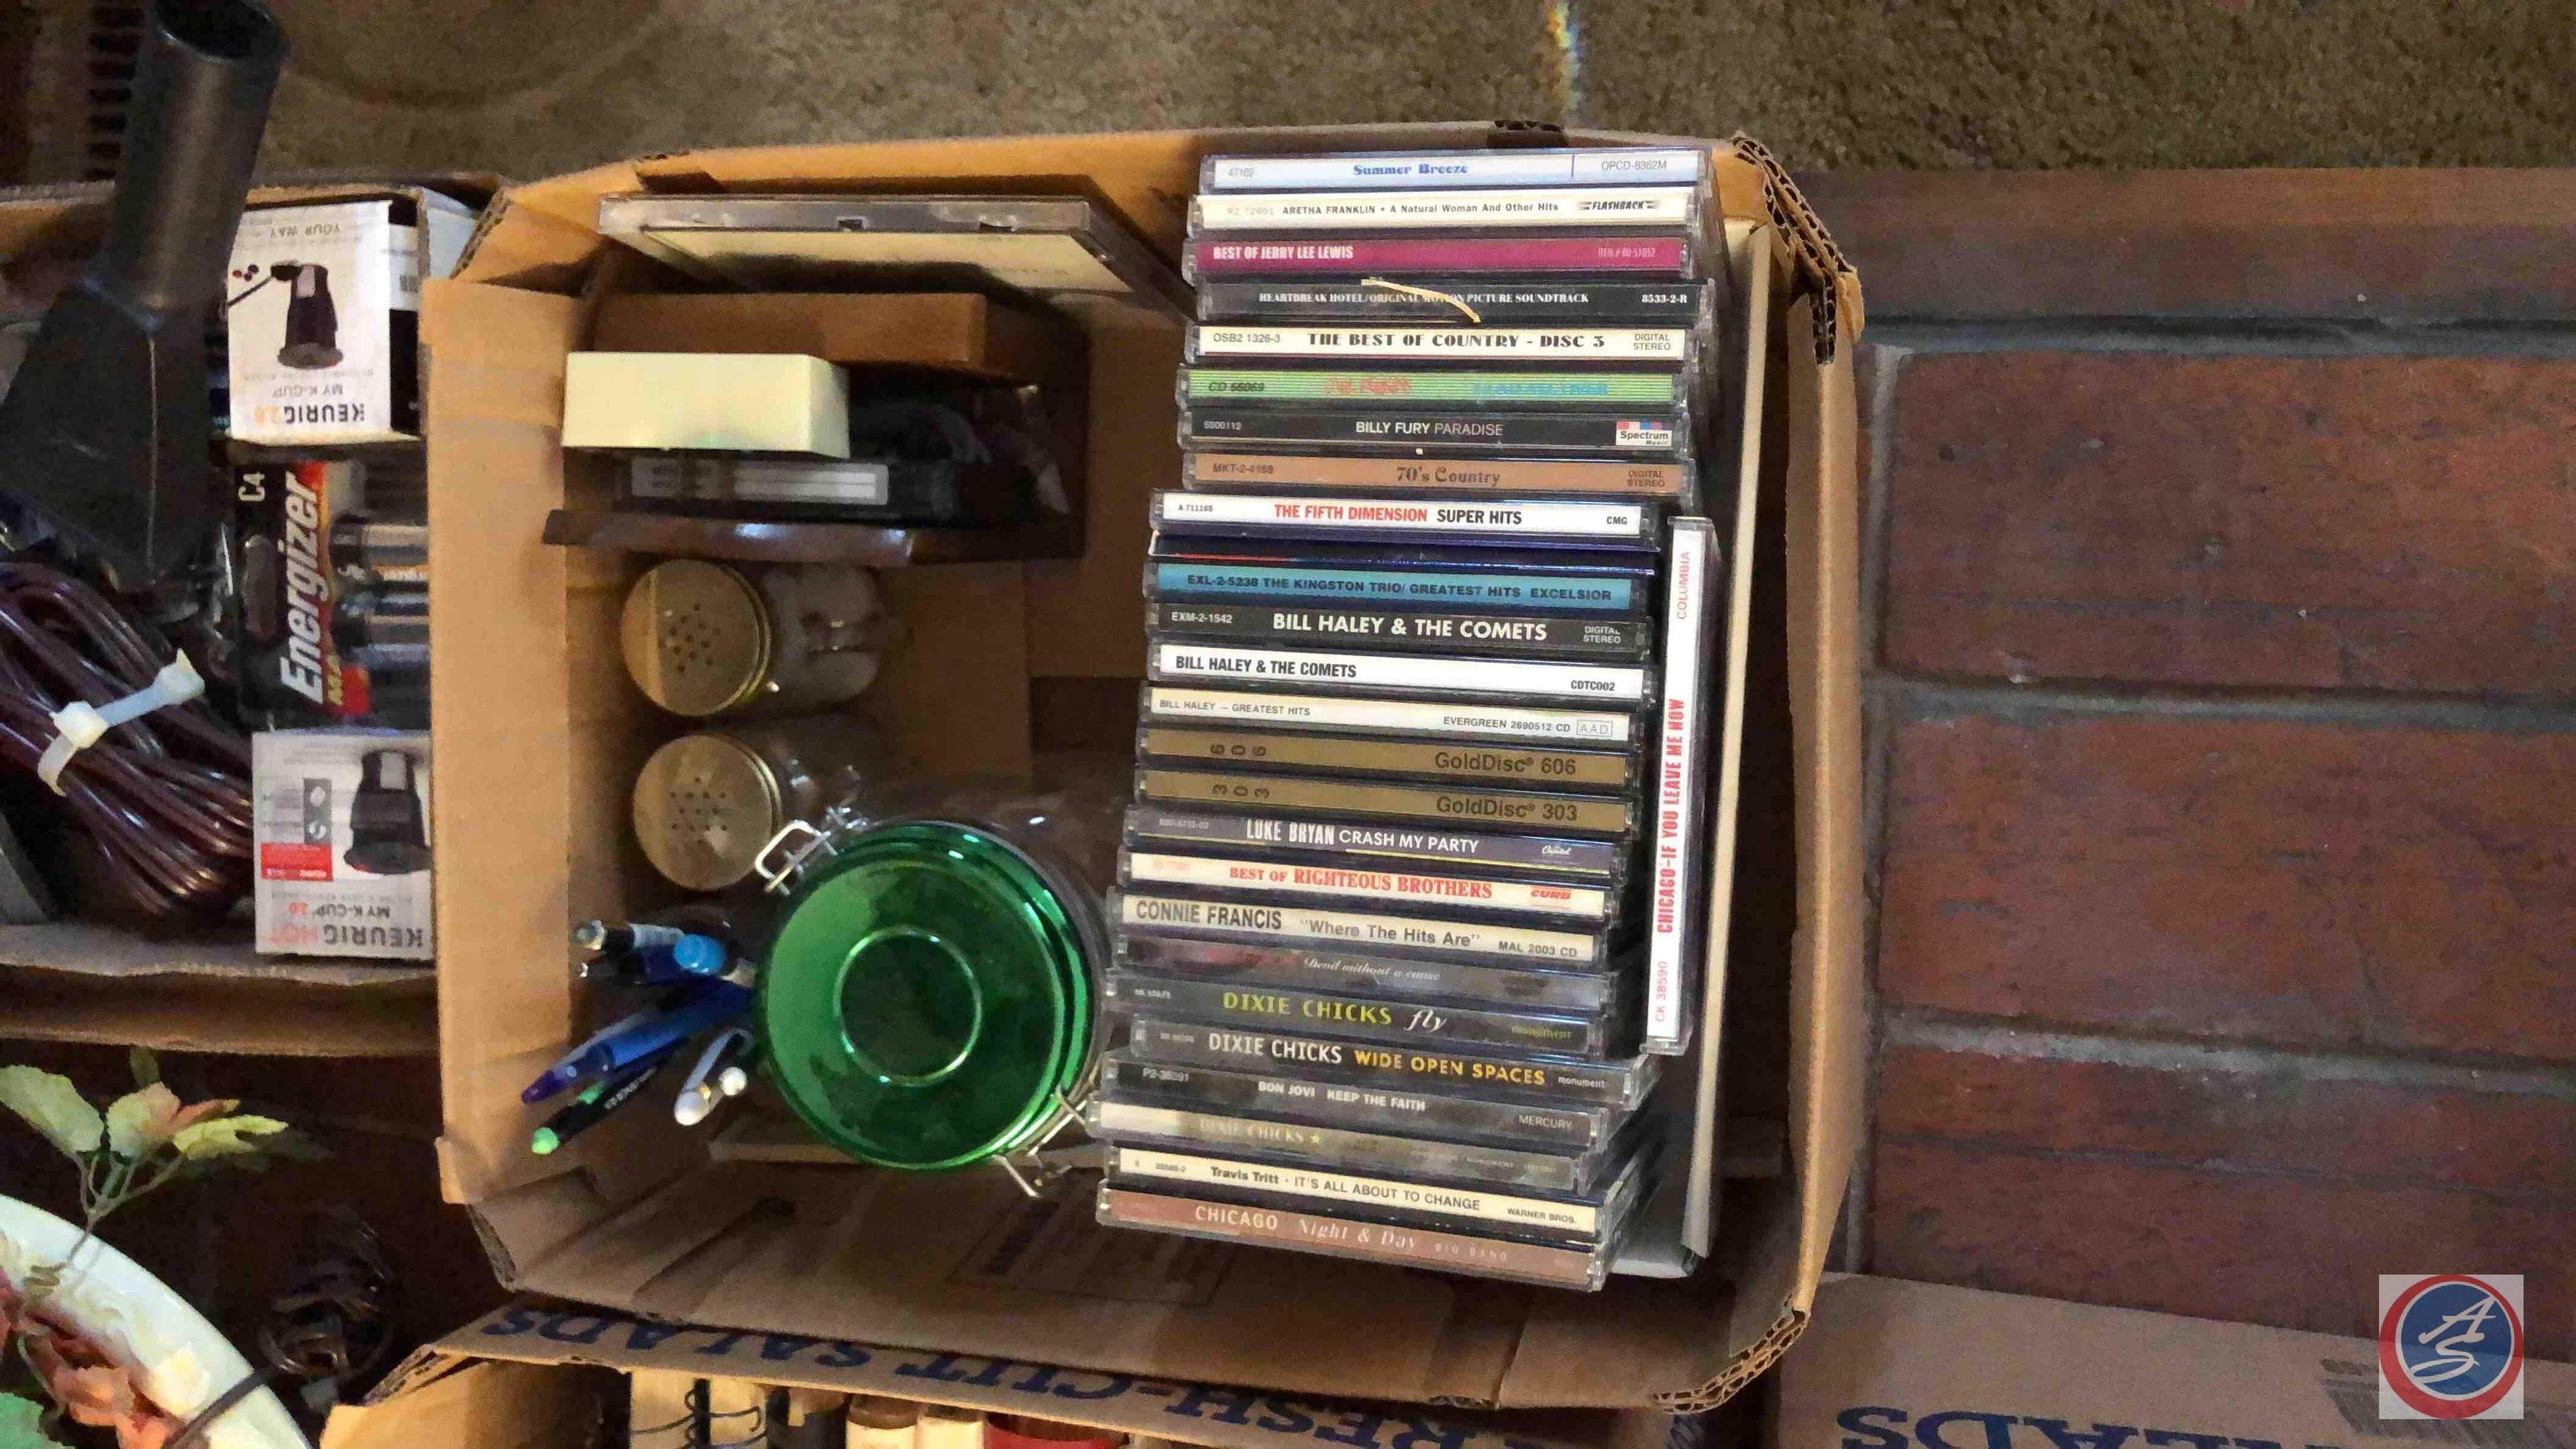 (7) Flats of assorted book, Guitar Music, assorted items, cd's picture and creamer, cup and saucer,